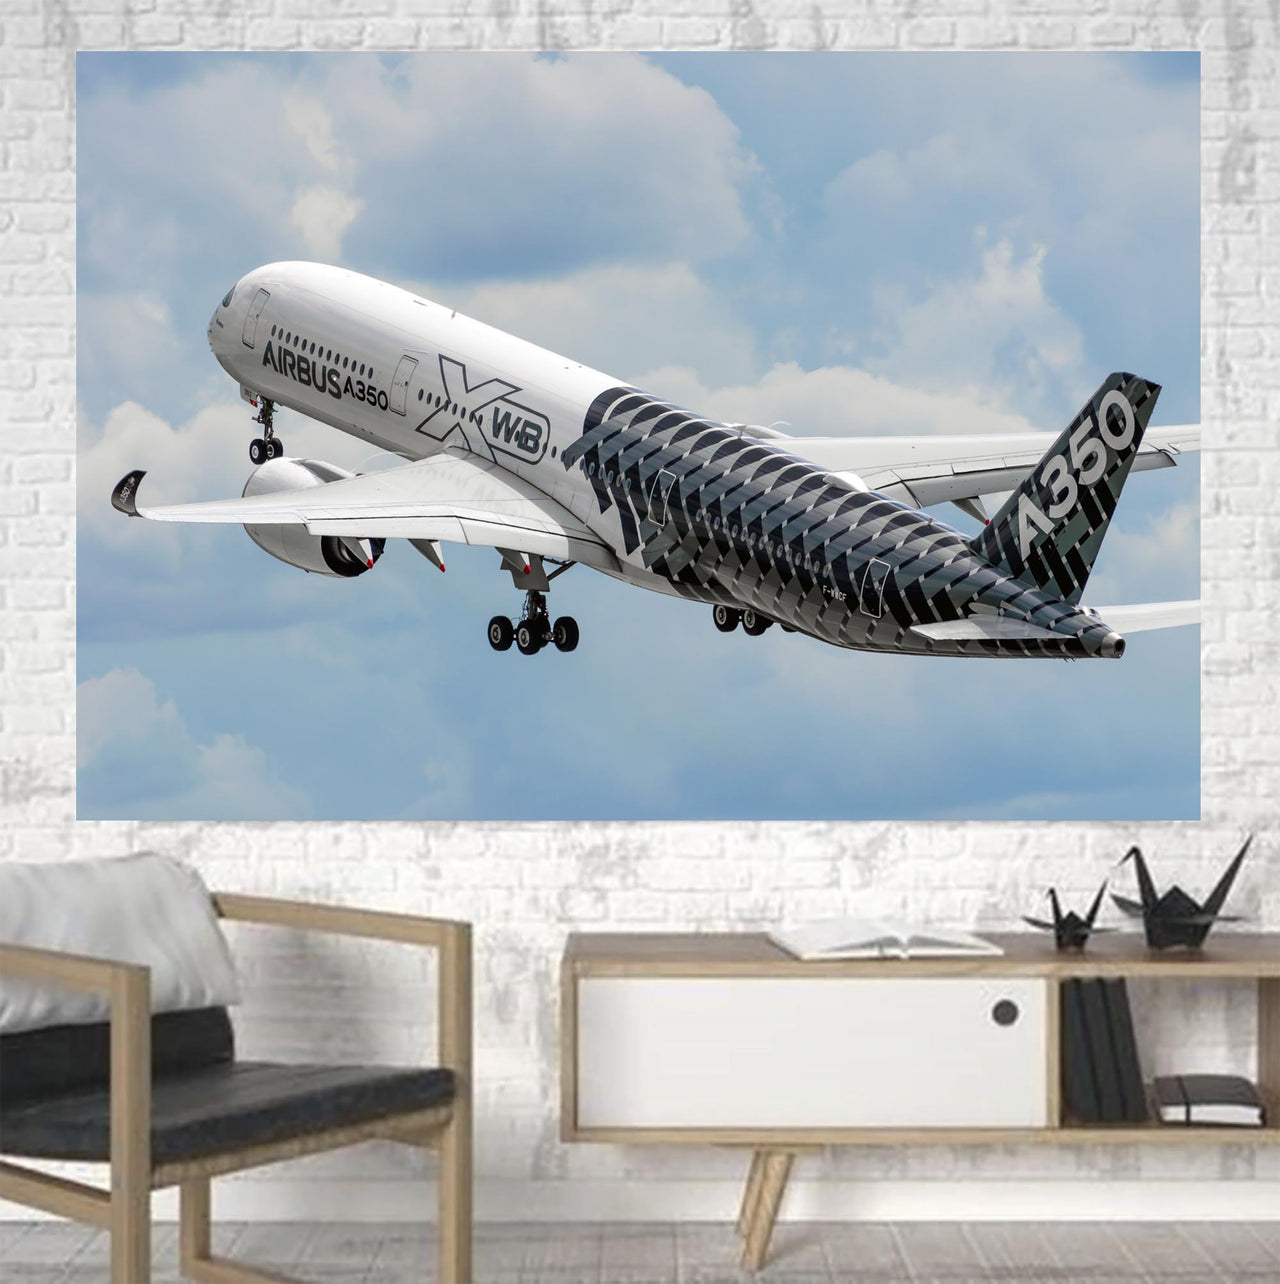 Departing Airbus A350 (Original Livery) Printed Canvas Posters (1 Piece)